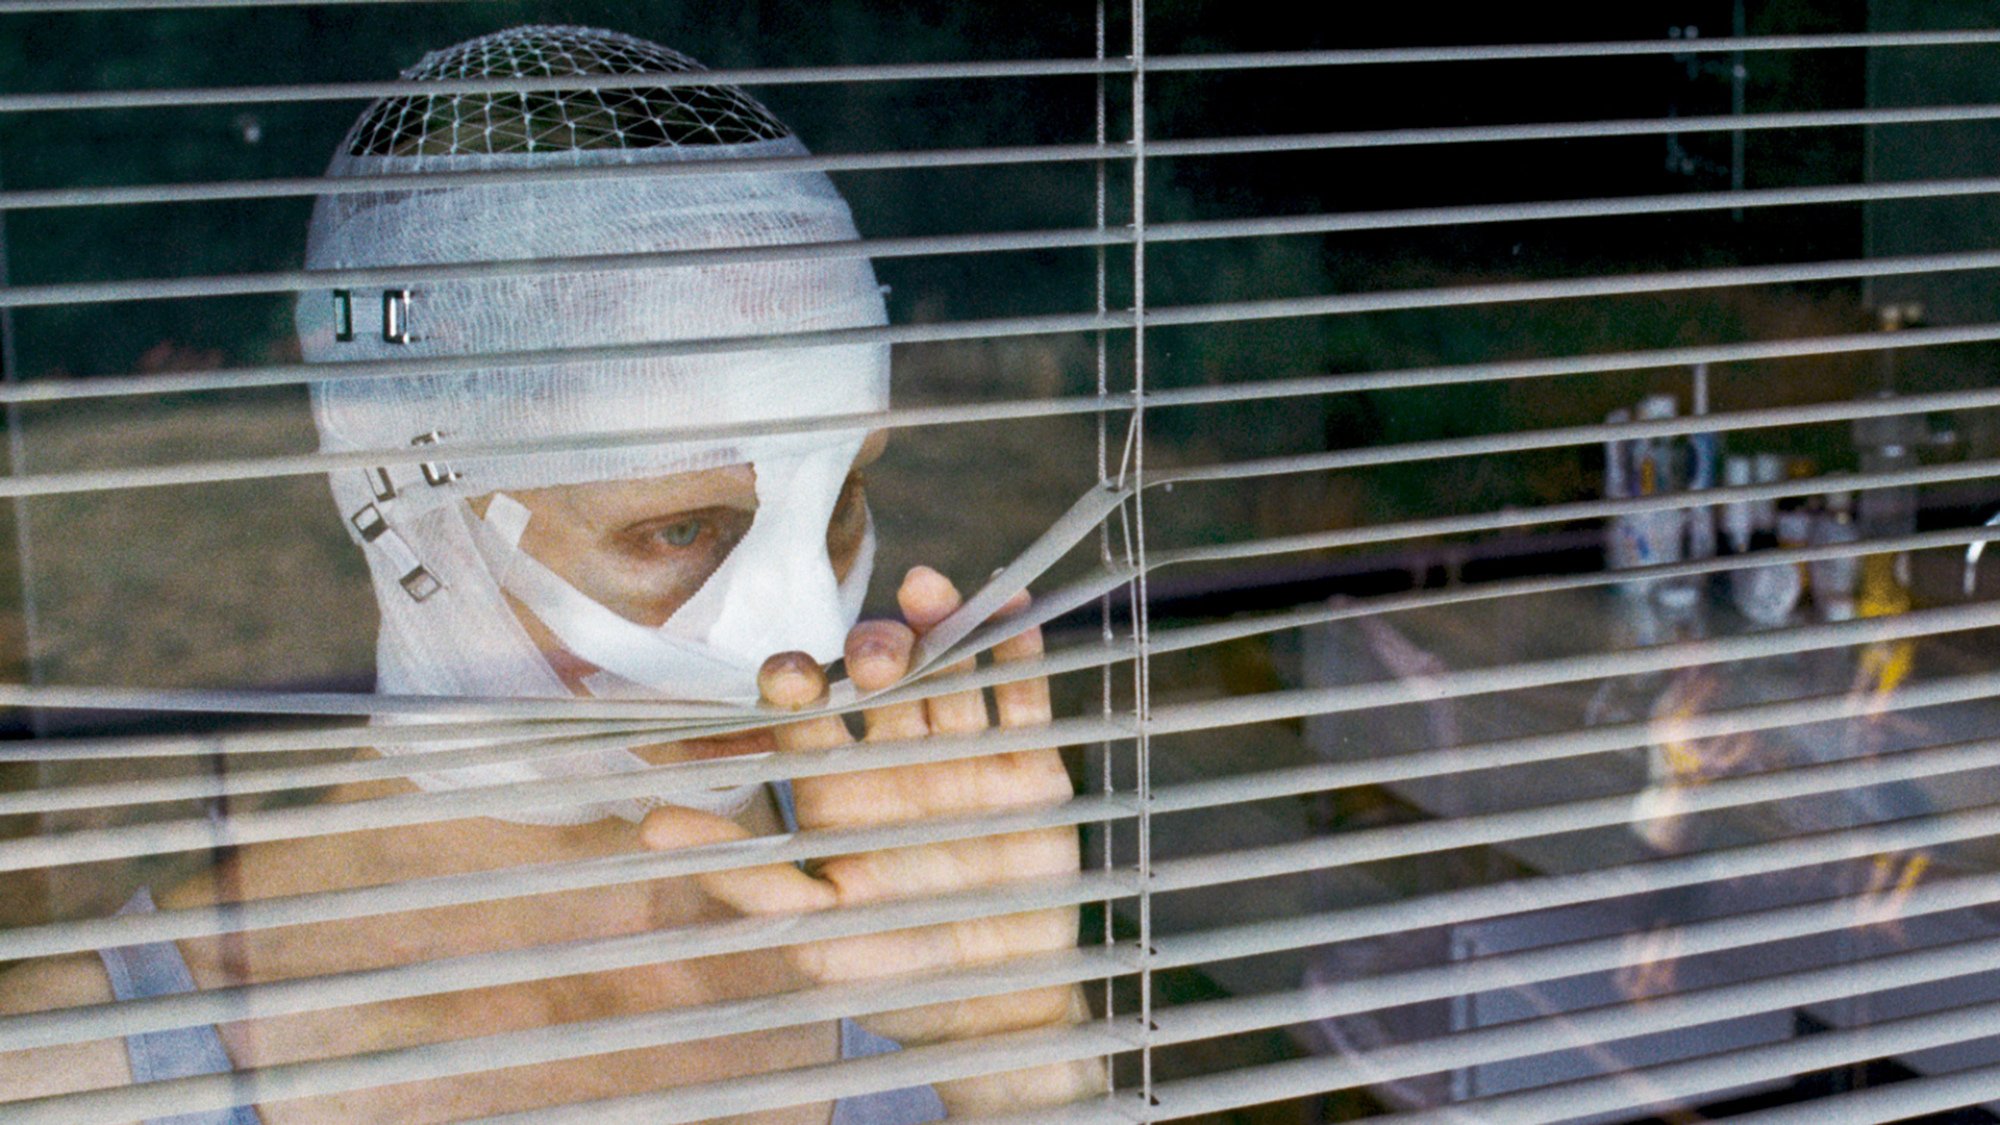 A woman in face bandages peers through blinds.